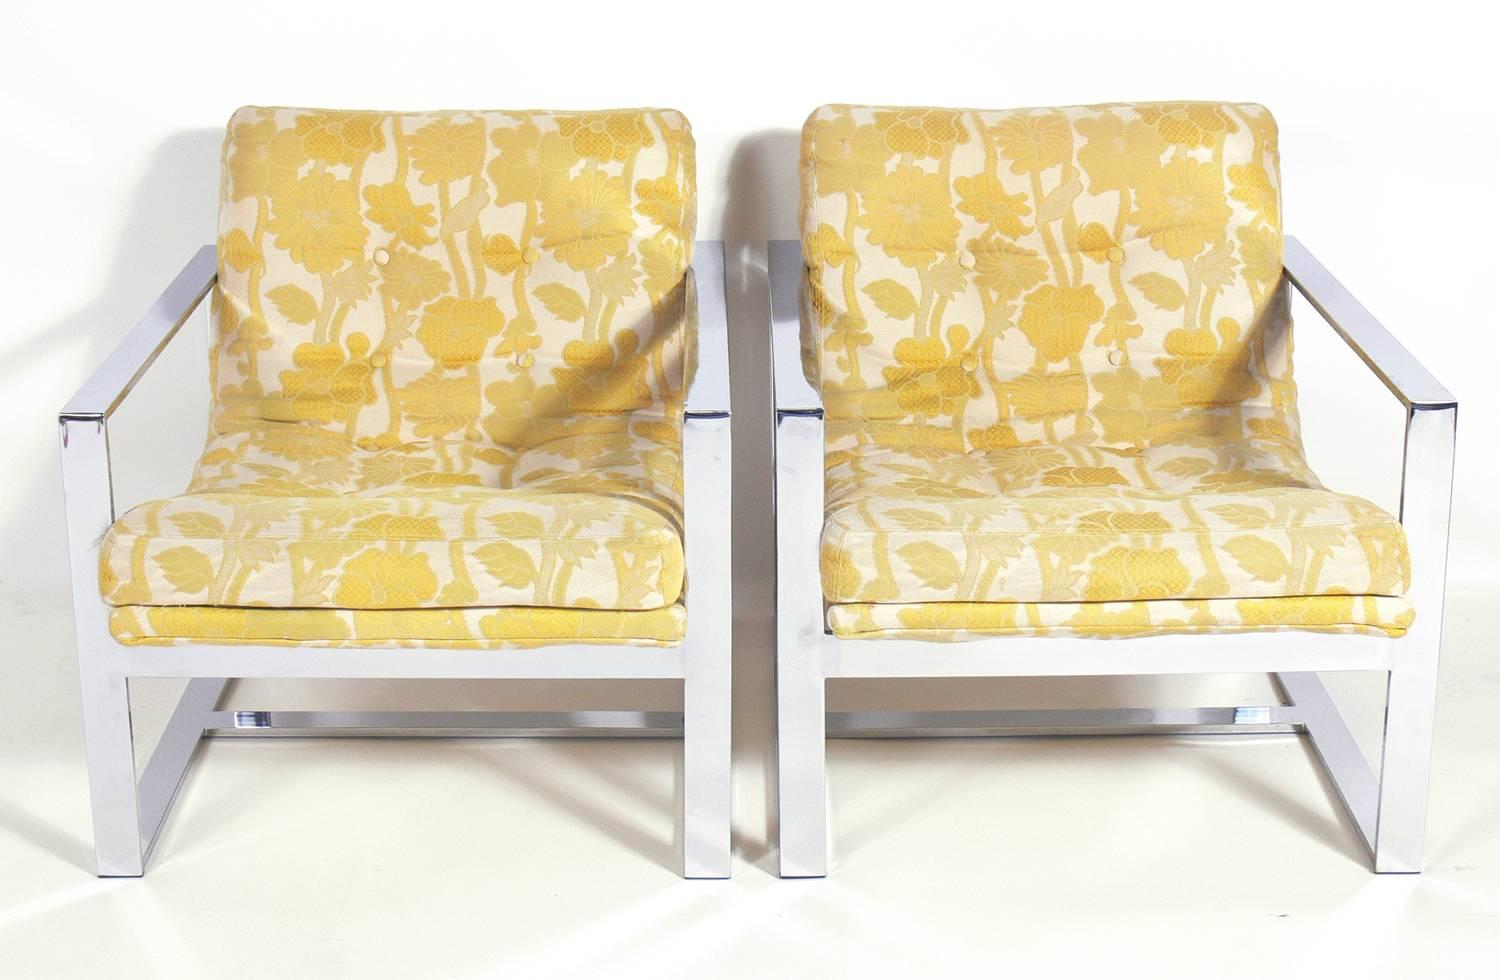 Milo Baughman chrome lounge chairs, American, circa 1960s. They retain the Milo Baughman for Thayer Coggin tag under the seat. Clean lined, architectural chrome frames are a great contrast to the curvaceous seats. These chairs are currently being